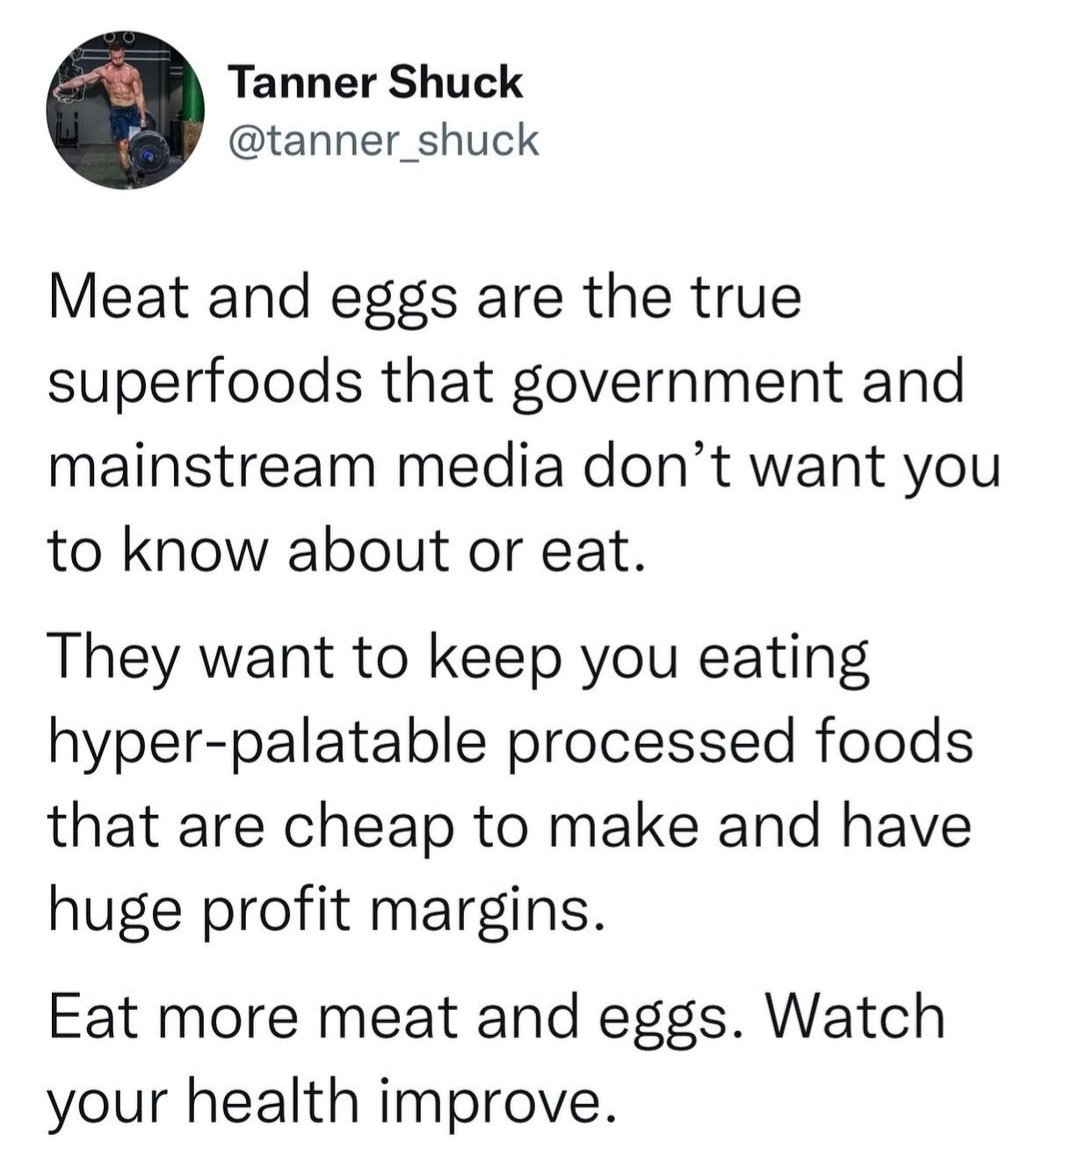 Couldn't have said it better myself. Great to see that more people are now realising this. You don't have to turn into full carnivore mode overnight. Just fill up more on meat & eggs, see what happens #eatmeat #nutrition #health #biology #nutritionscience #nutrients #energy